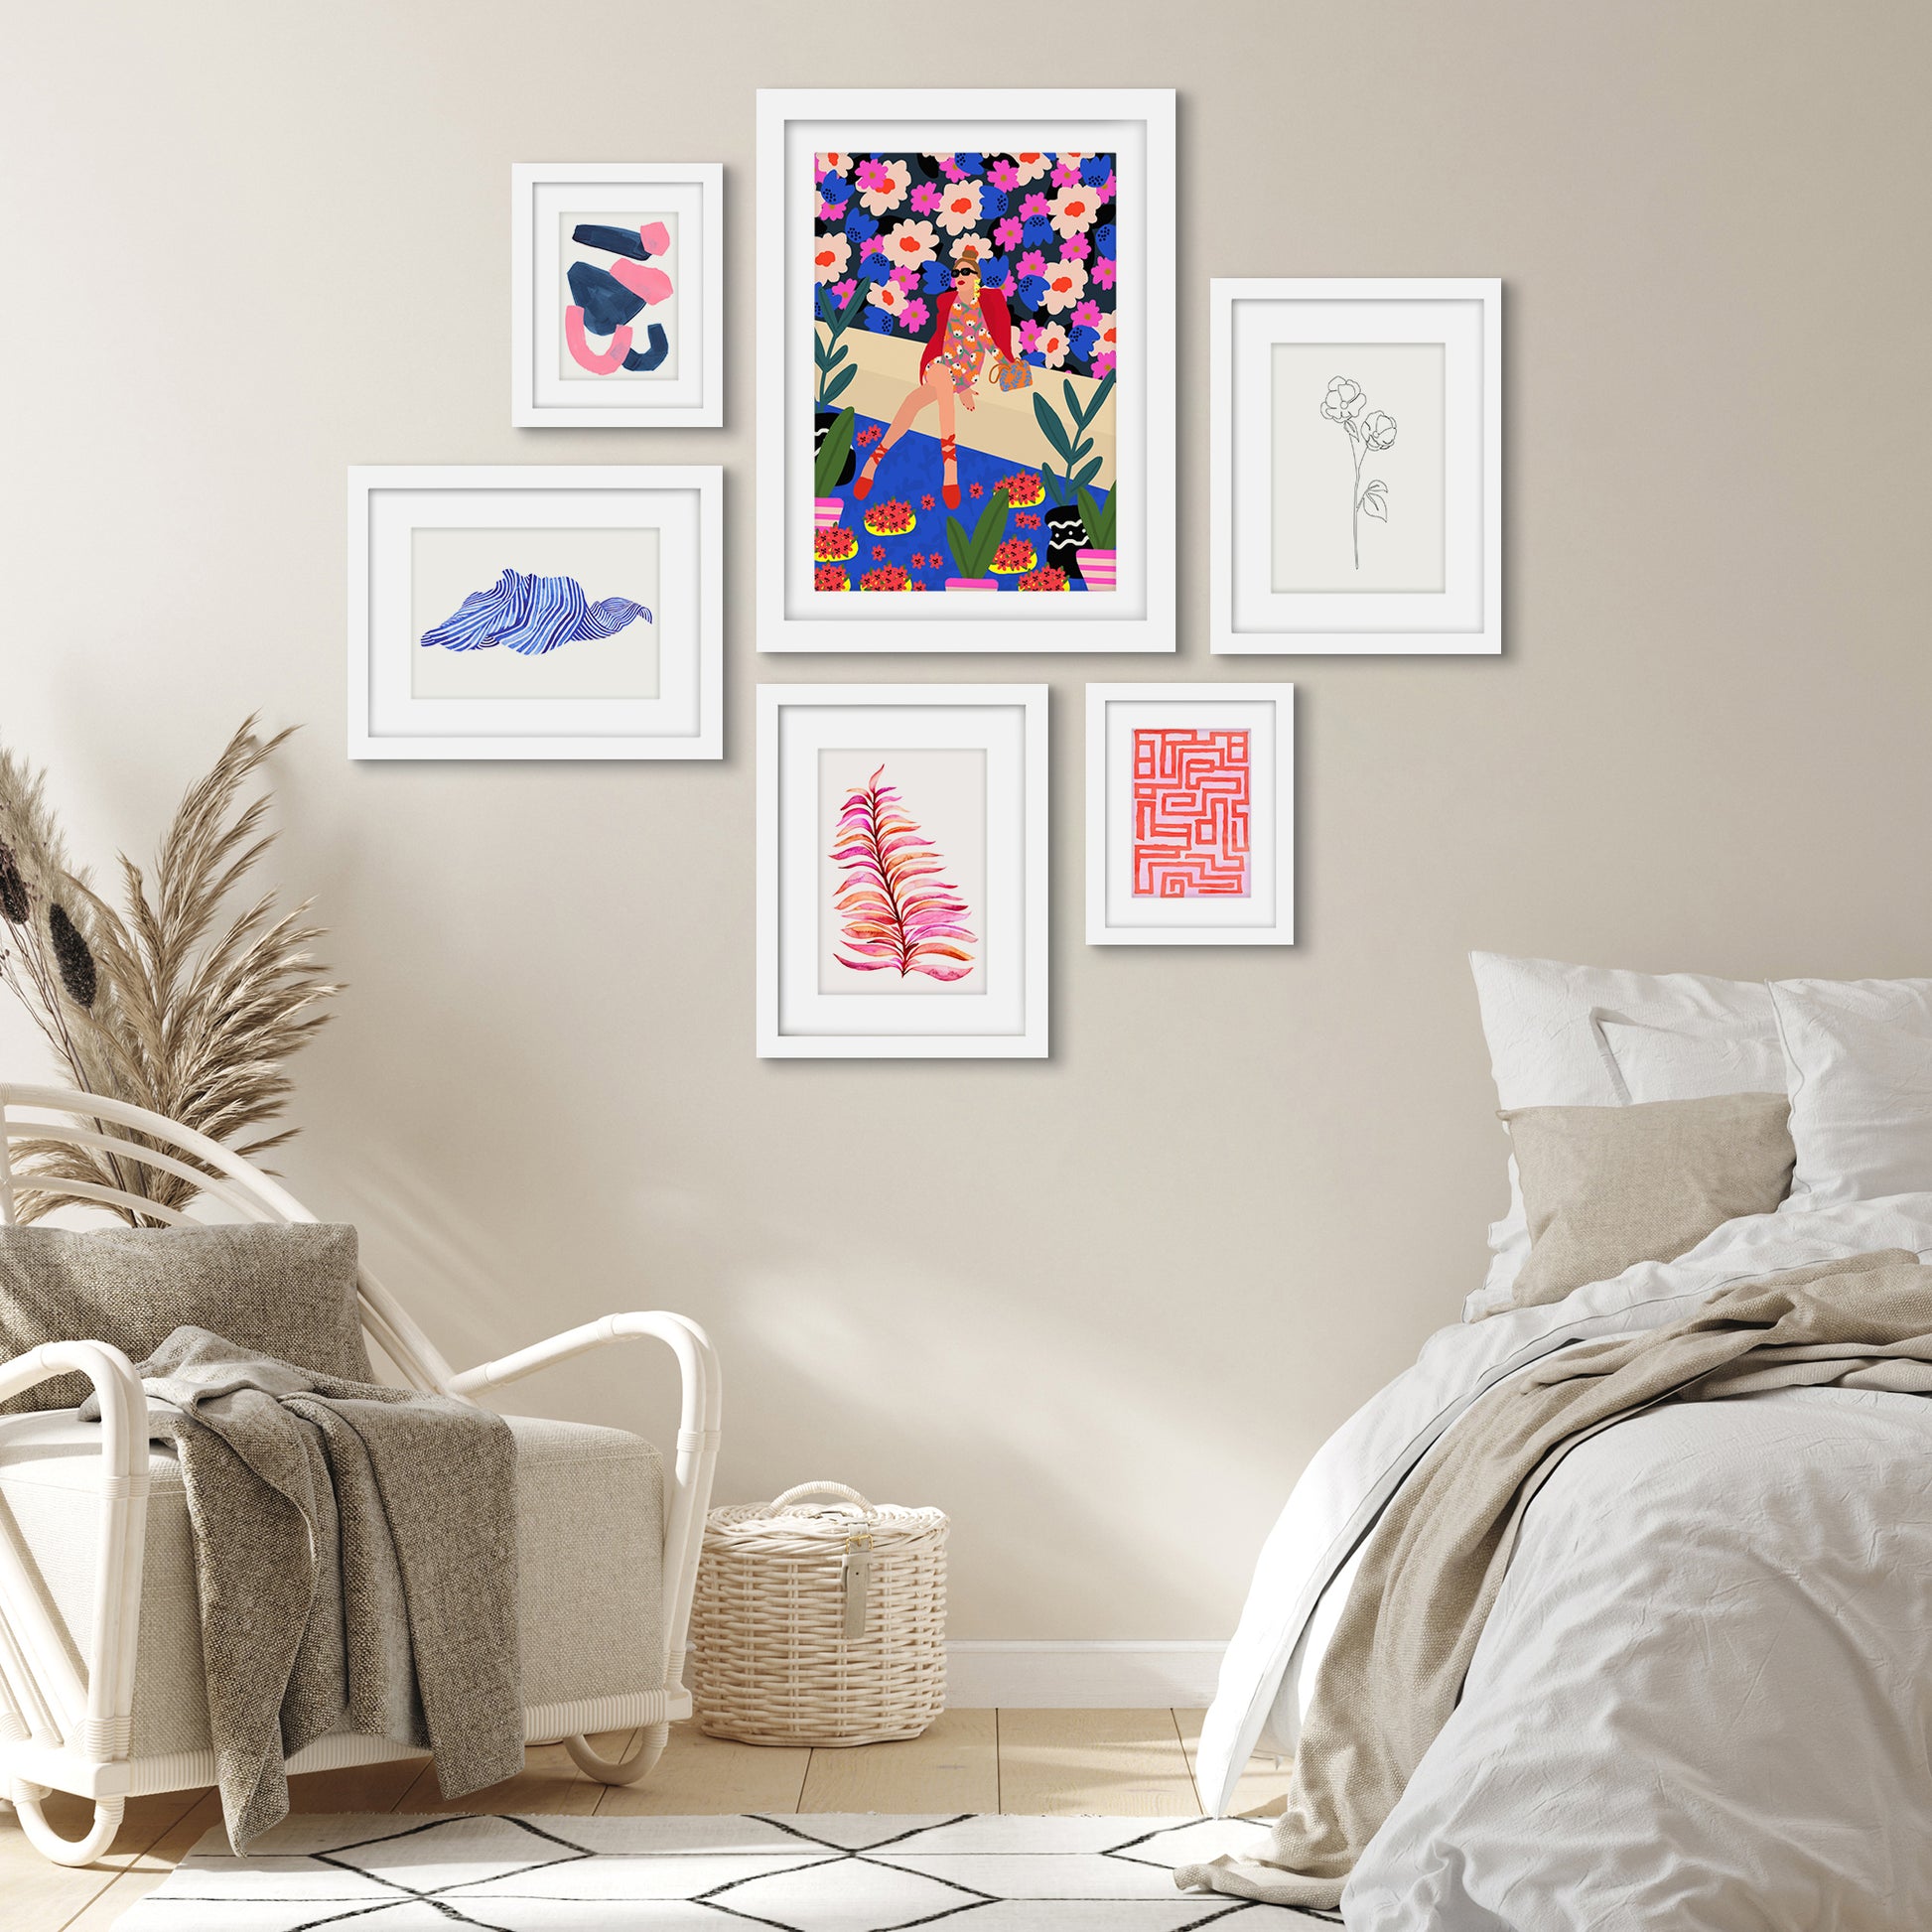 Be Patient Everything Will Be Fine - 6 Piece Framed Gallery Wall Set - Americanflat